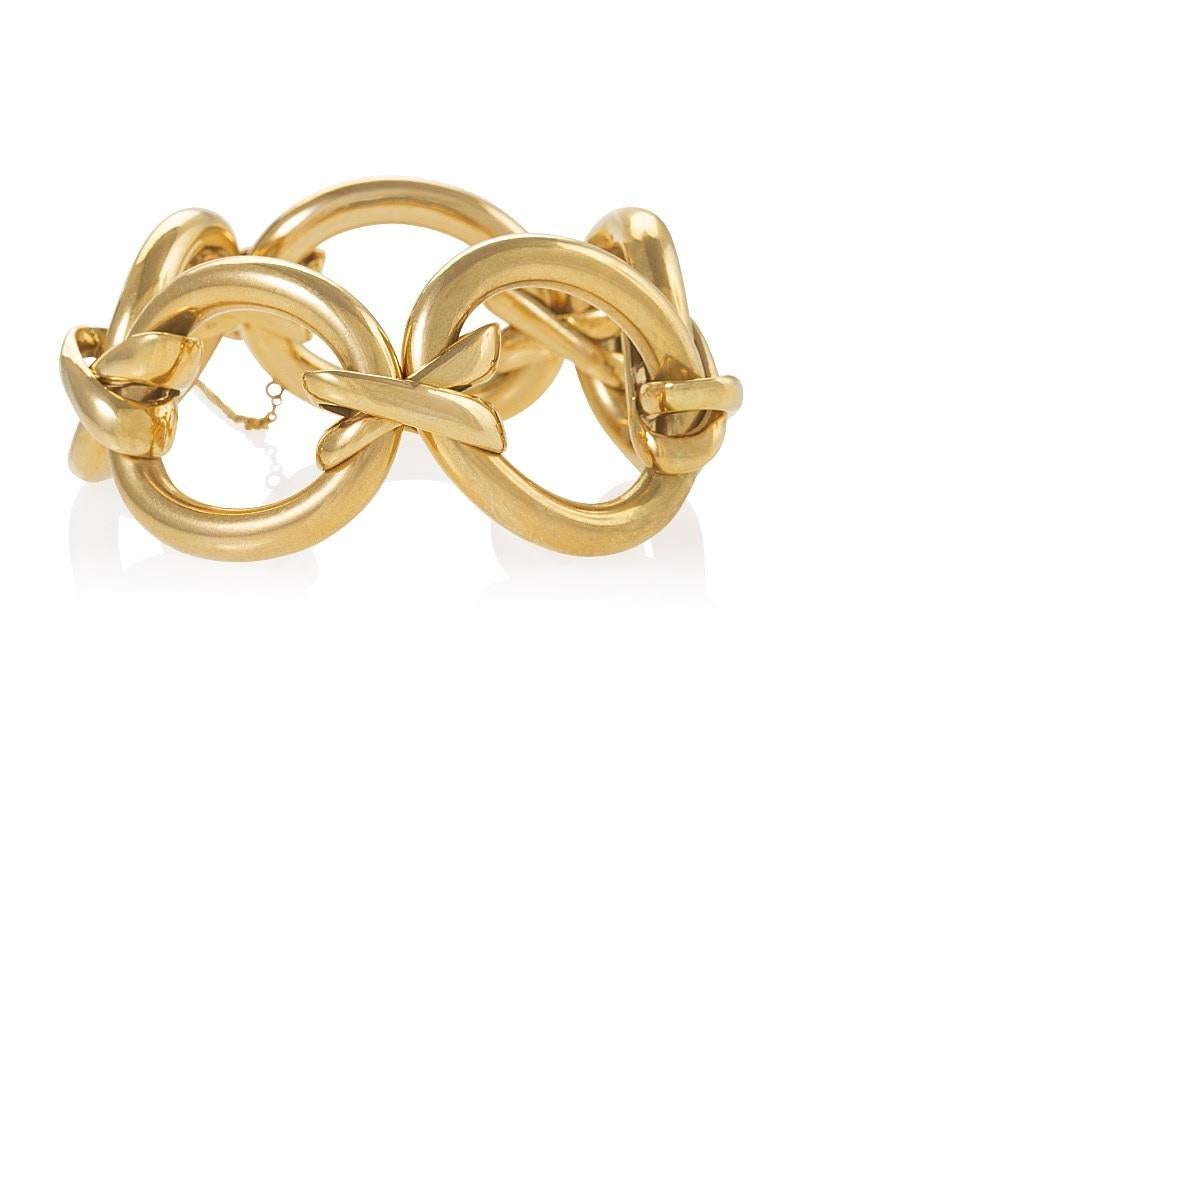 Women's Gold Bracelet by Paloma Picasso for Tiffany & Co.